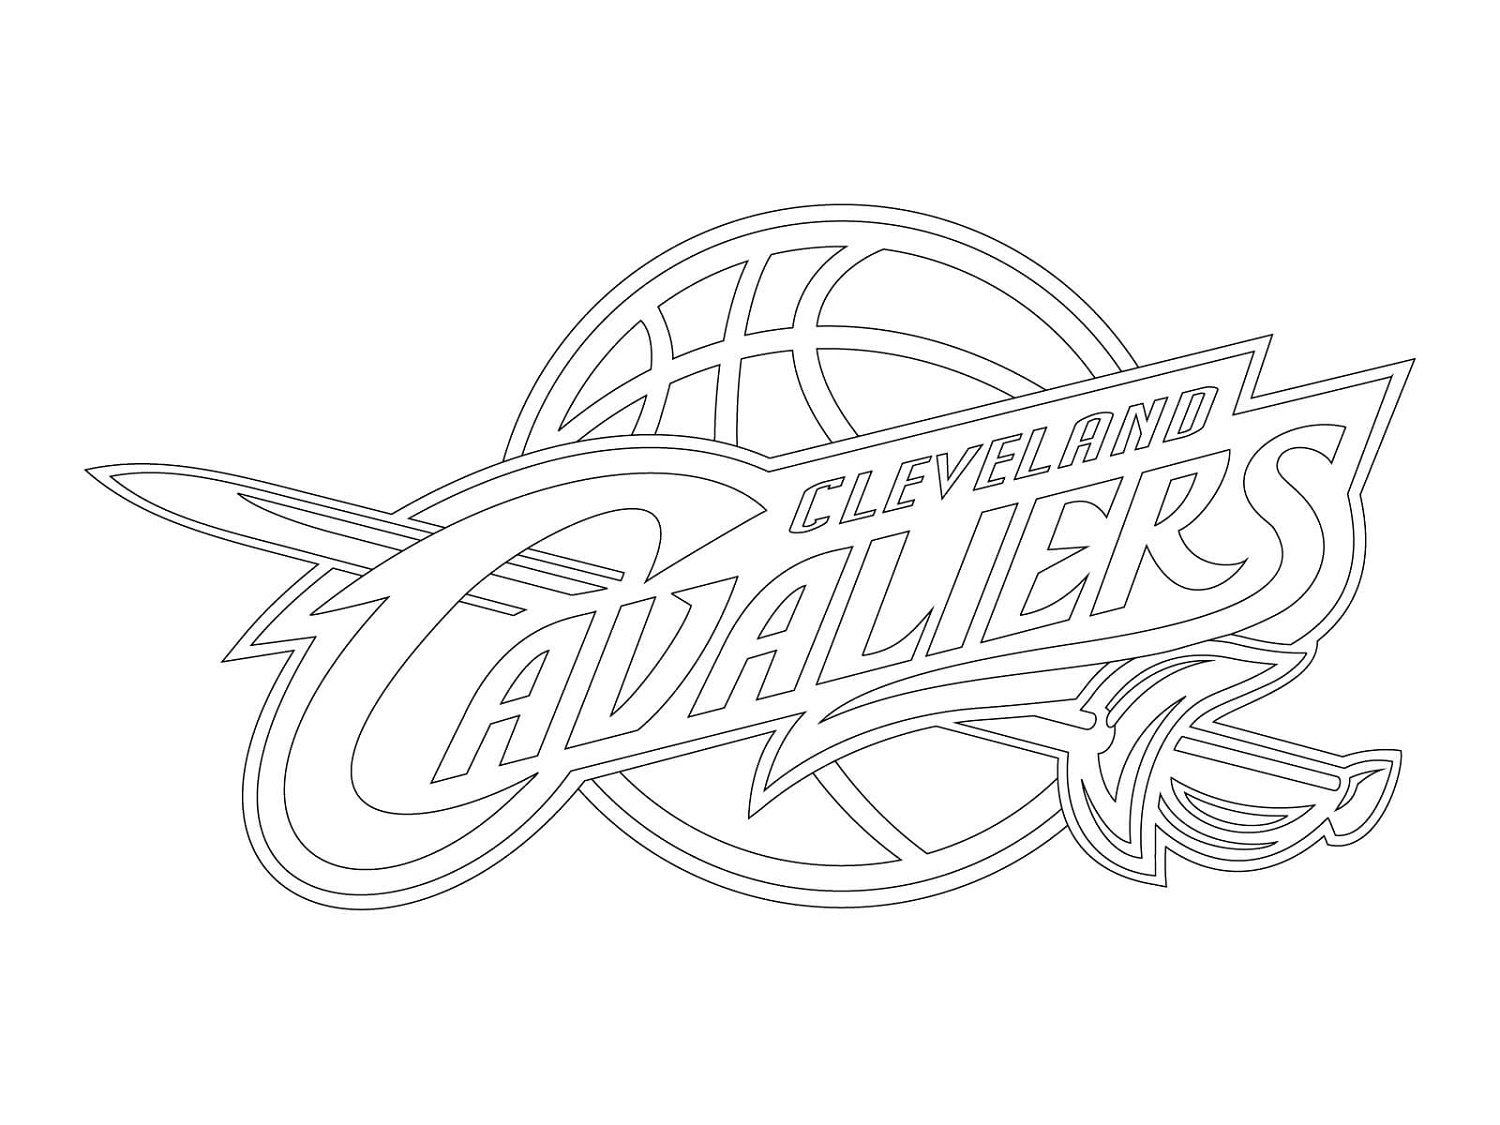 cleveland cavaliers logo coloring pages